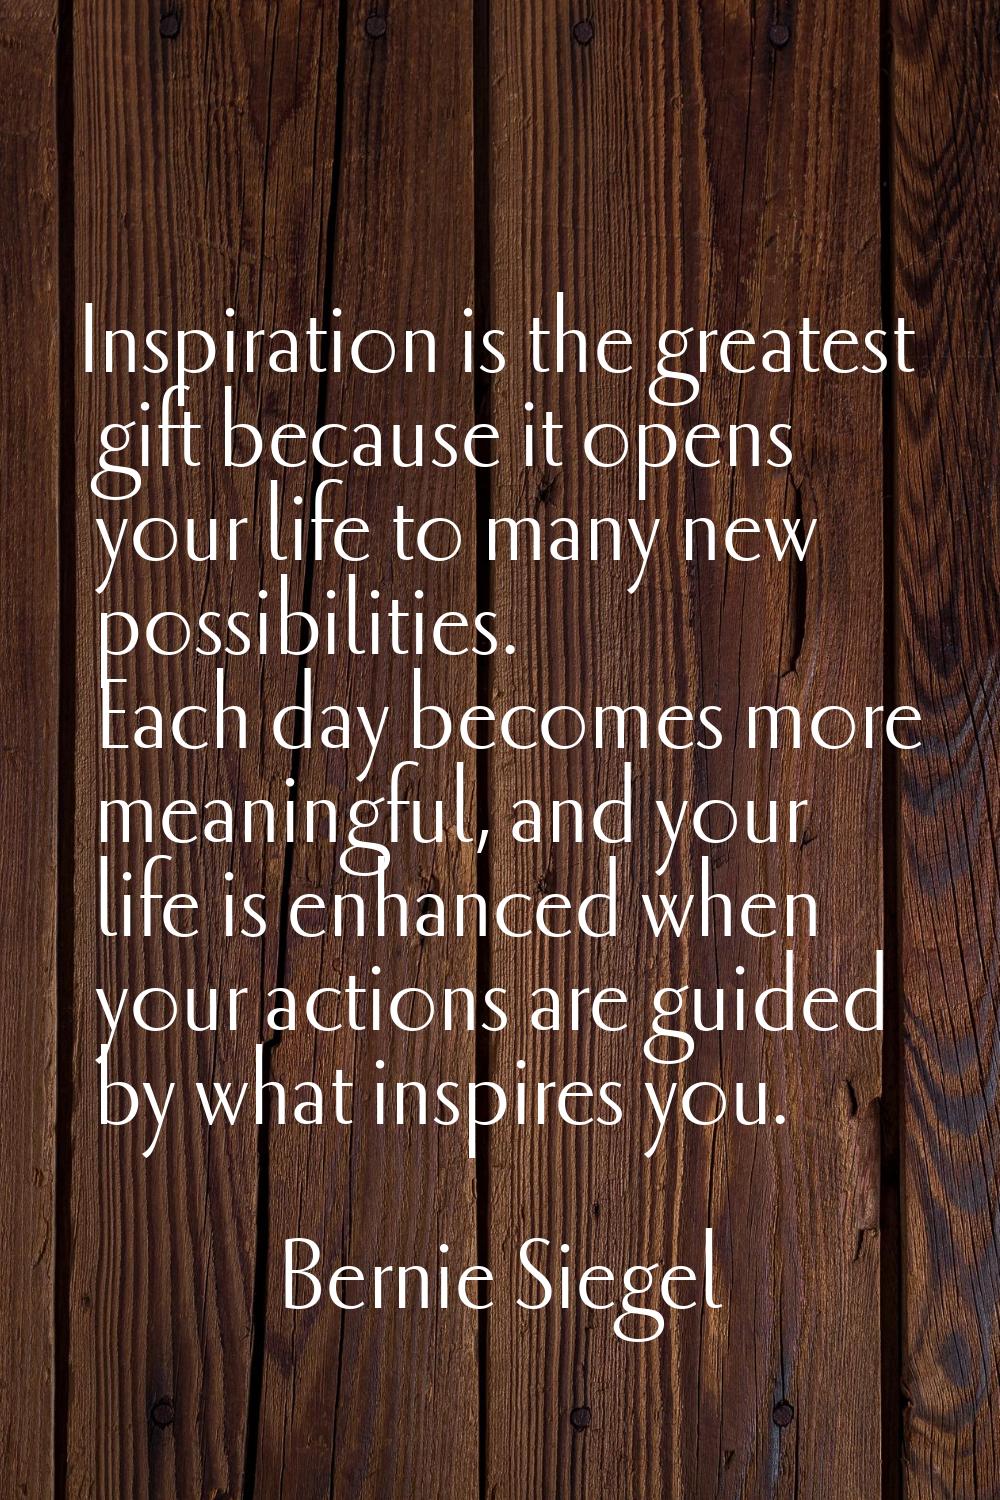 Inspiration is the greatest gift because it opens your life to many new possibilities. Each day bec